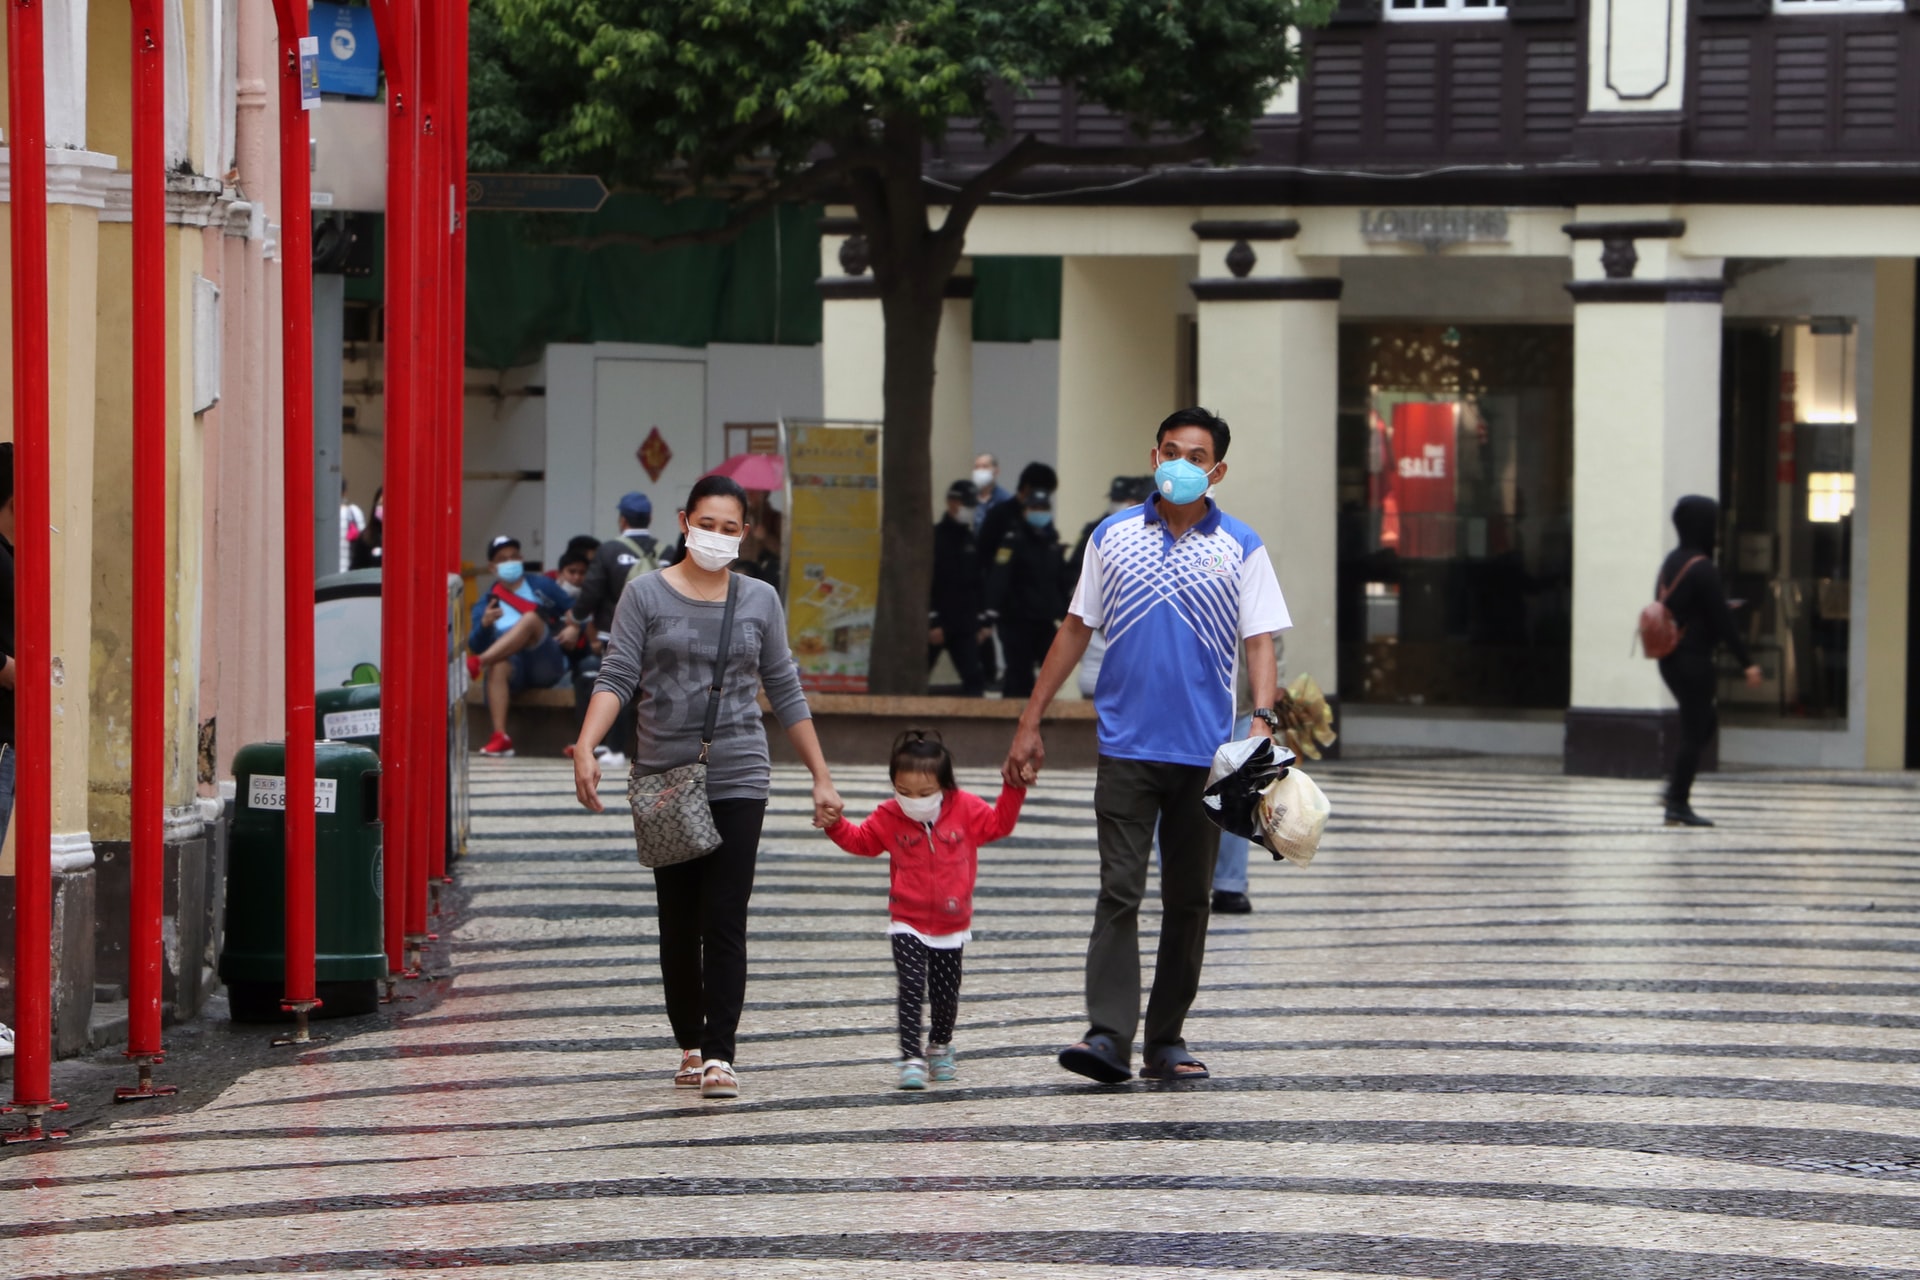 A family wearing masks and walking down the street in Macau